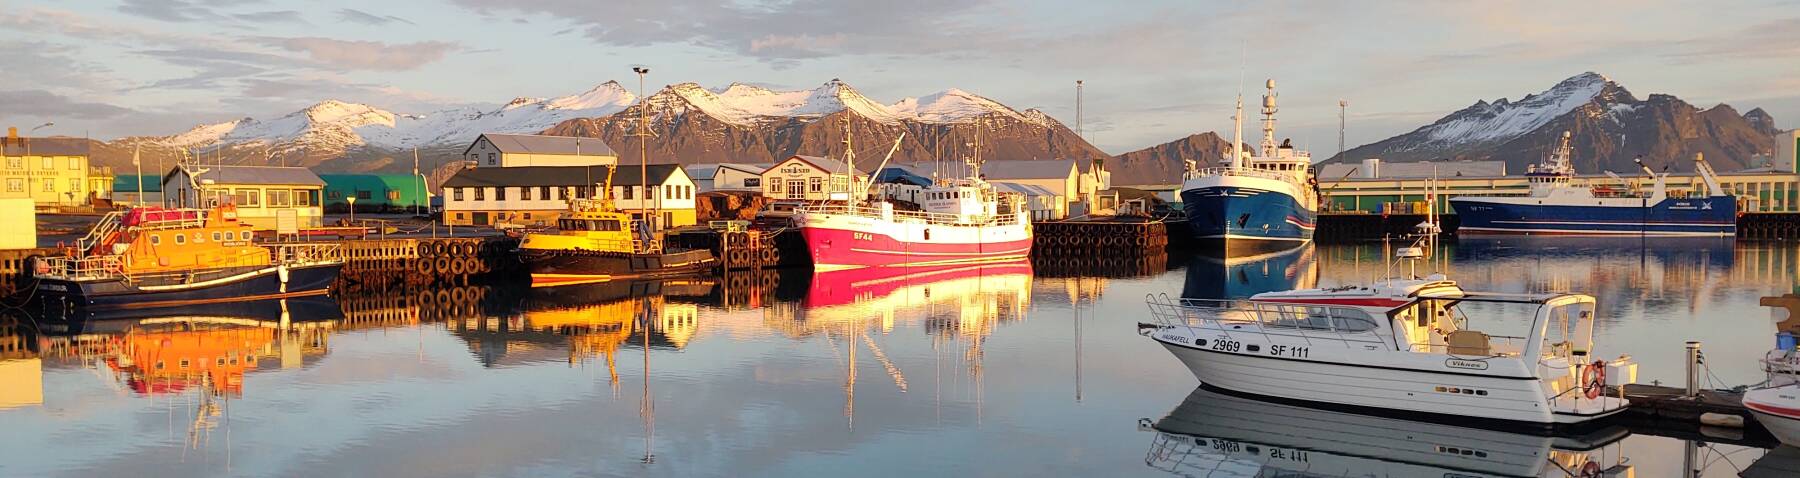 Fishing ships in the port of Höfn in Iceland.